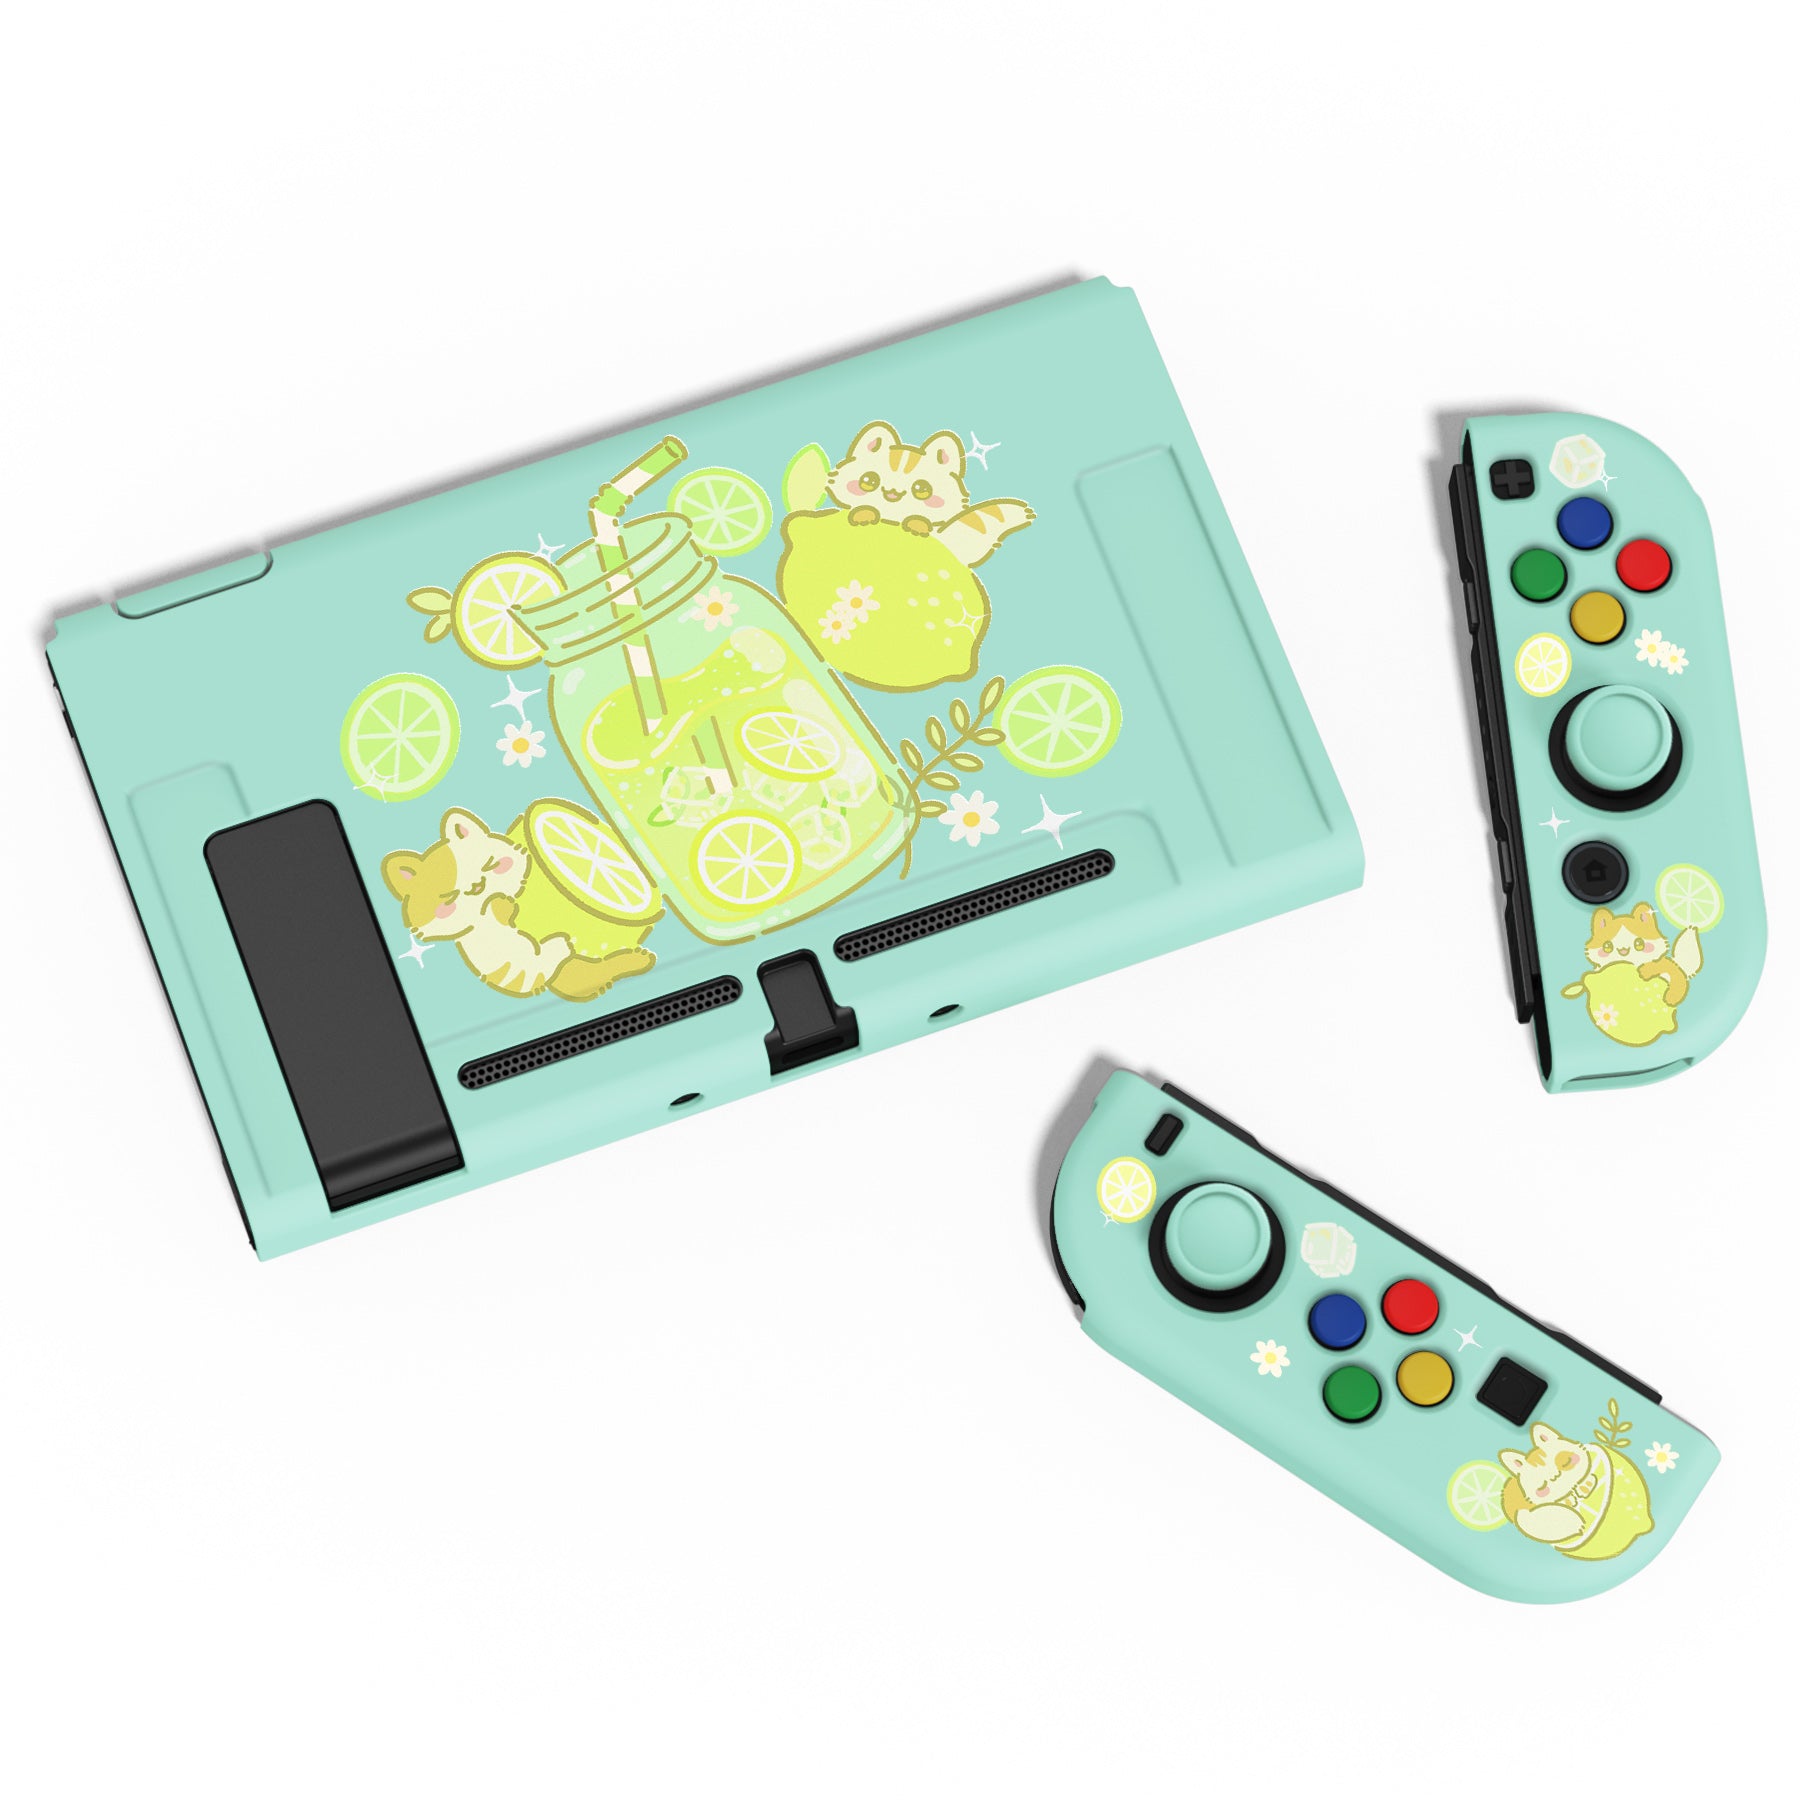 PlayVital ZealProtect Soft Protective Case for Nintendo Switch, Flexible Cover for Switch with Tempered Glass Screen Protector & Thumb Grips & ABXY Direction Button Caps - Lemonade Kitty - RNSYV6046 playvital